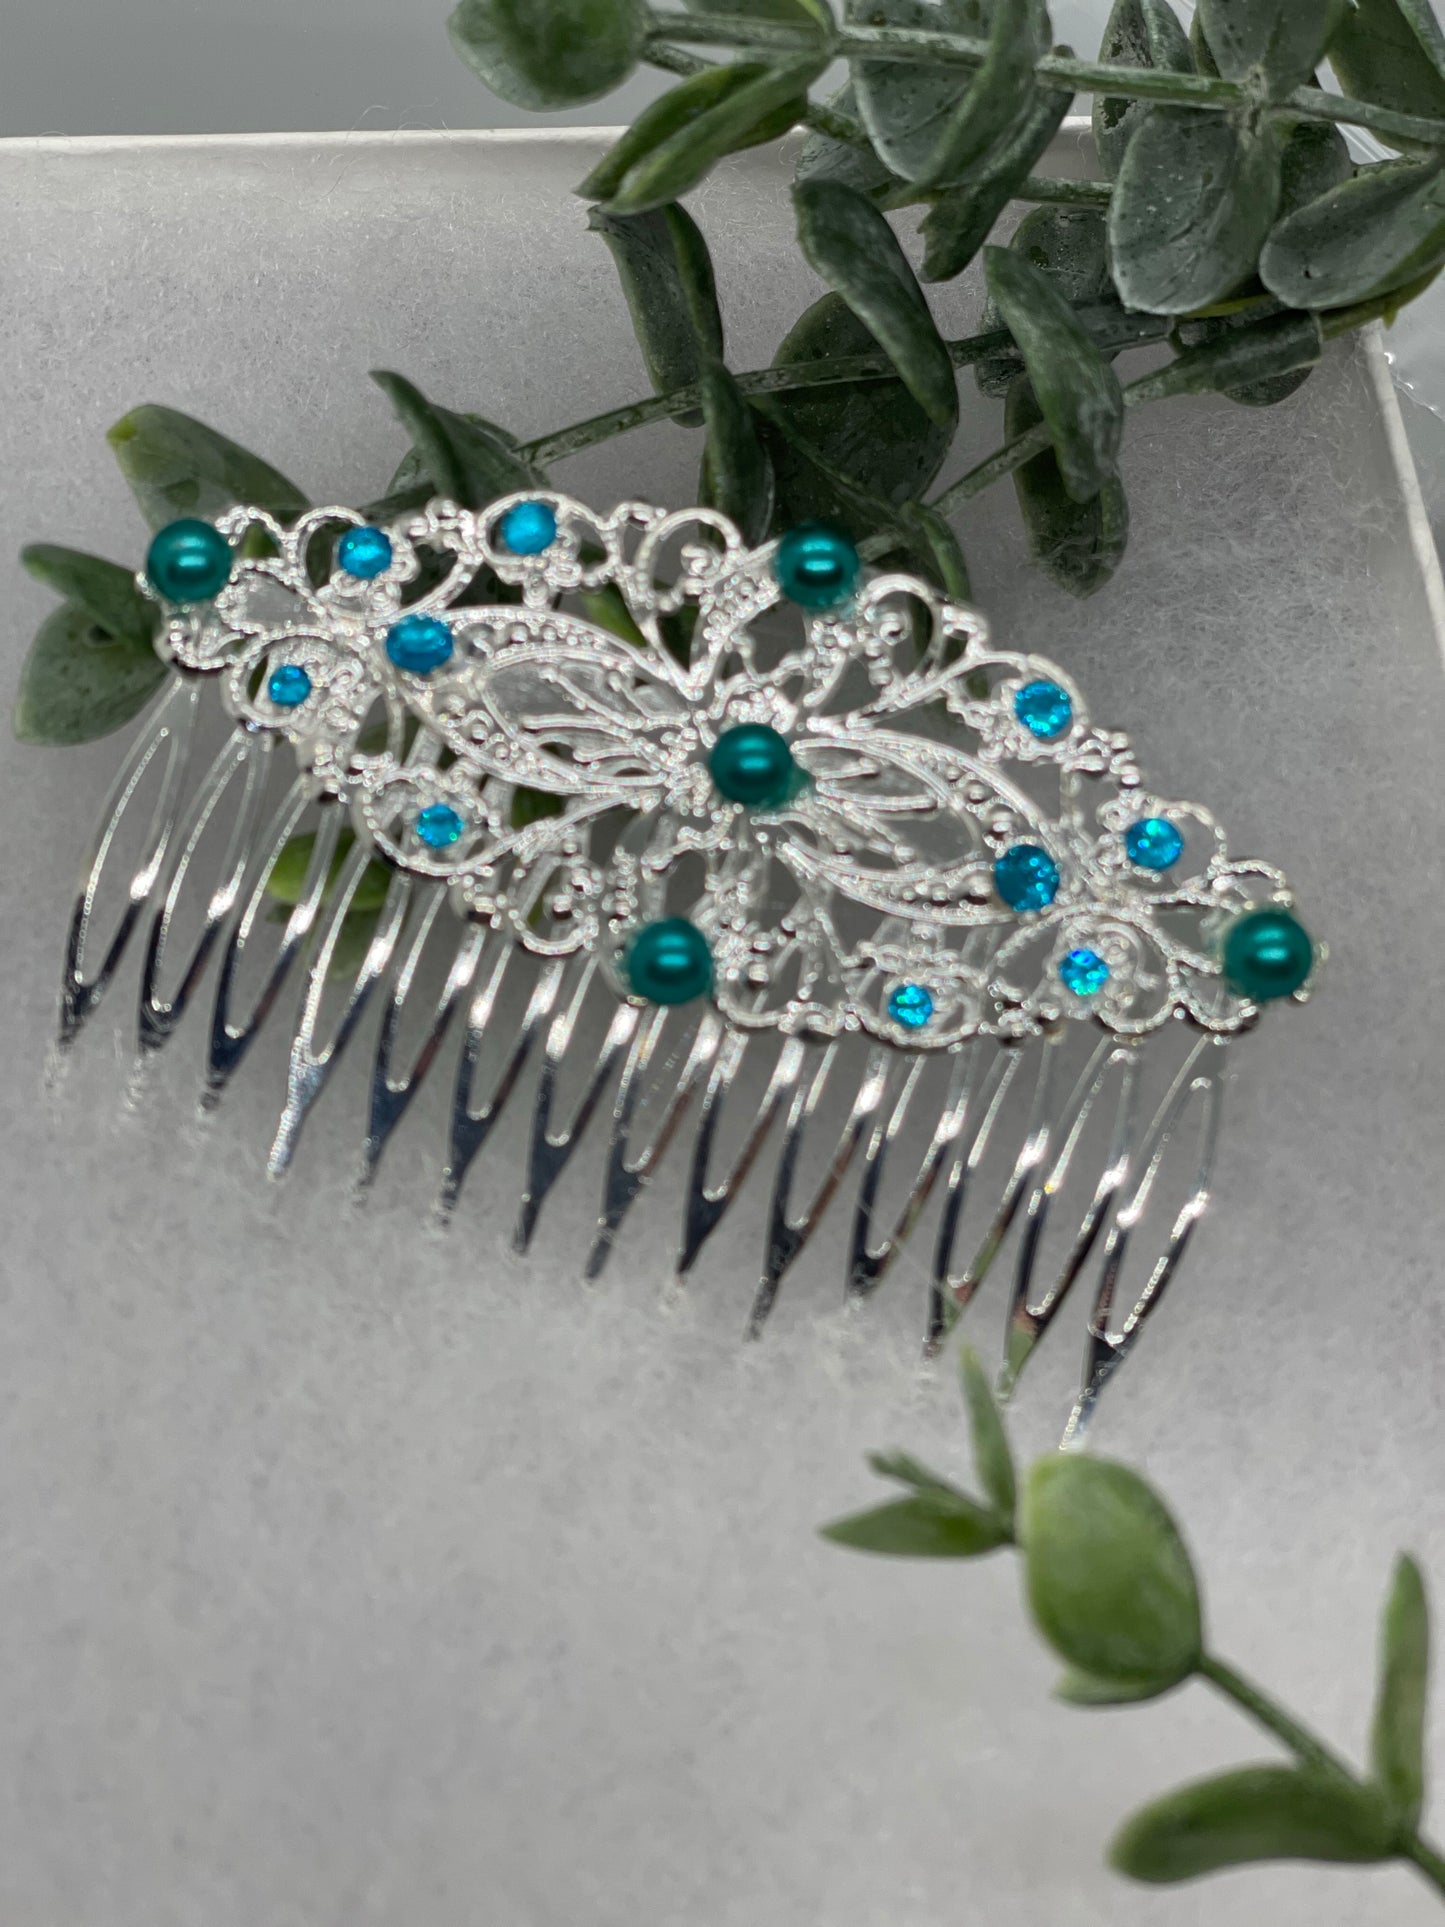 Green Teal crystal rhinestone pearls vintage style gold  side comb hair accessory accessories gift birthday 3.5” Metal side Comb